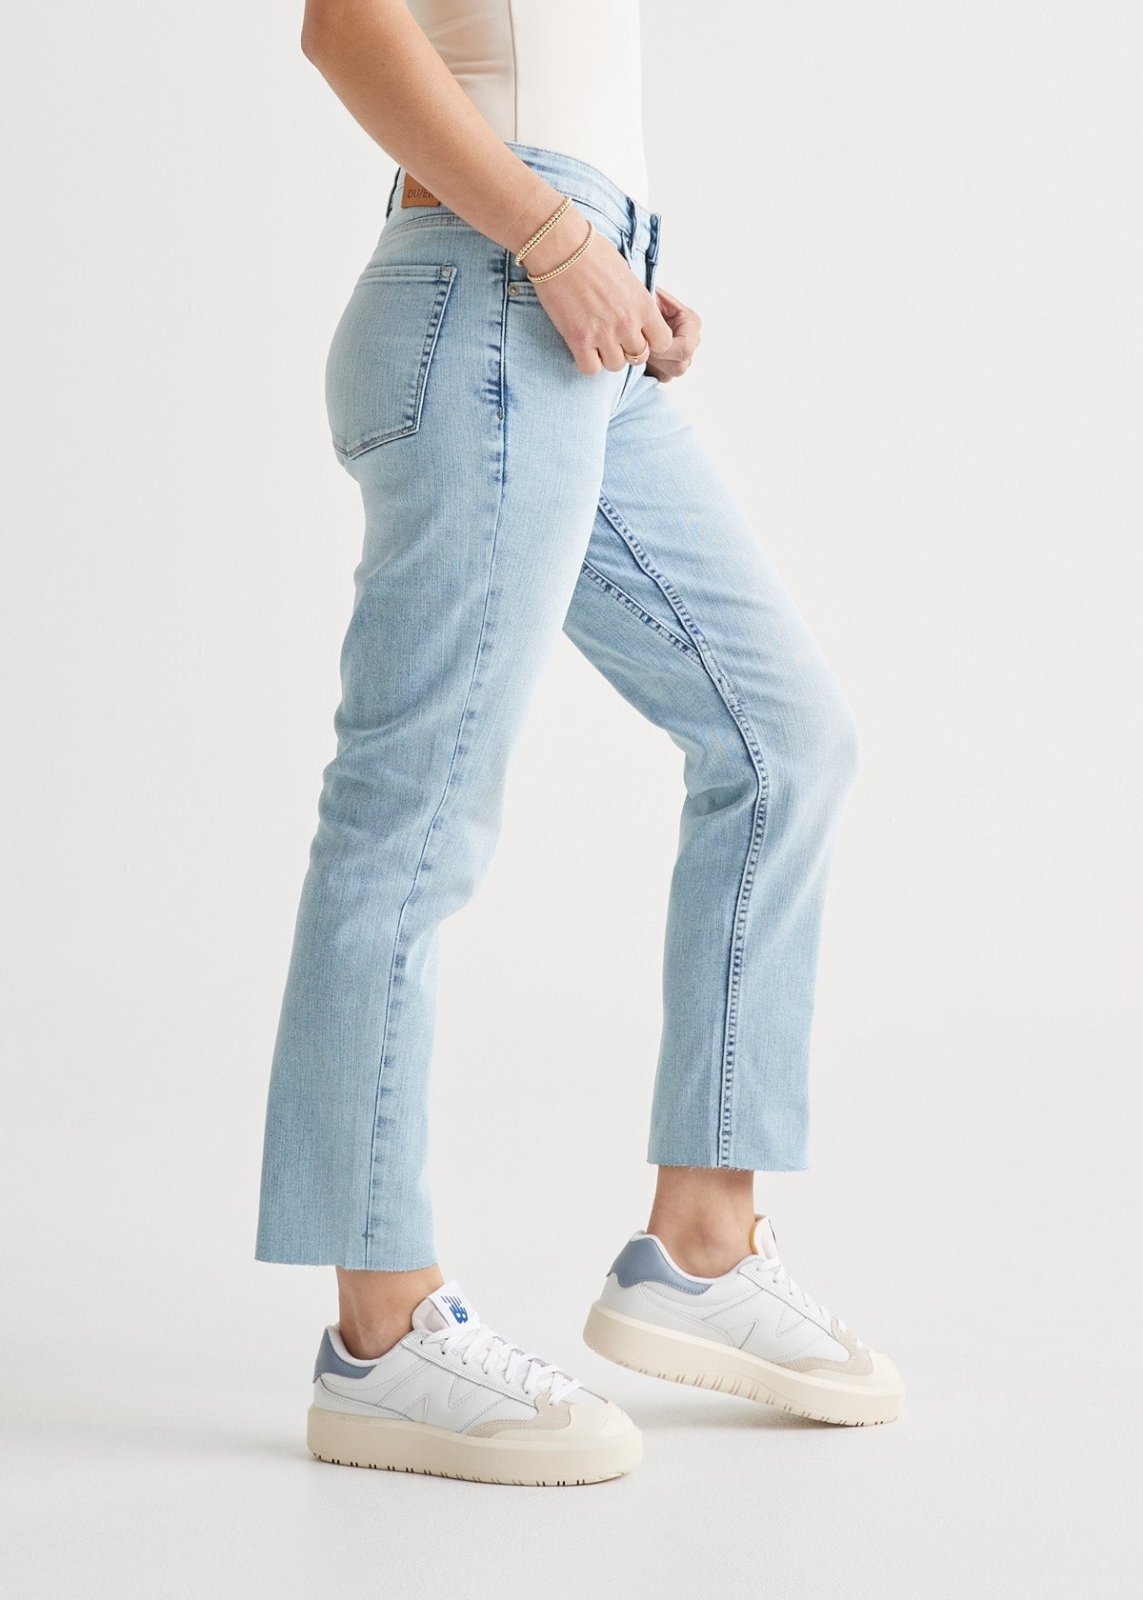 Shop Women's Girlfriend Jeans - Relaxed Slim Straight Fit